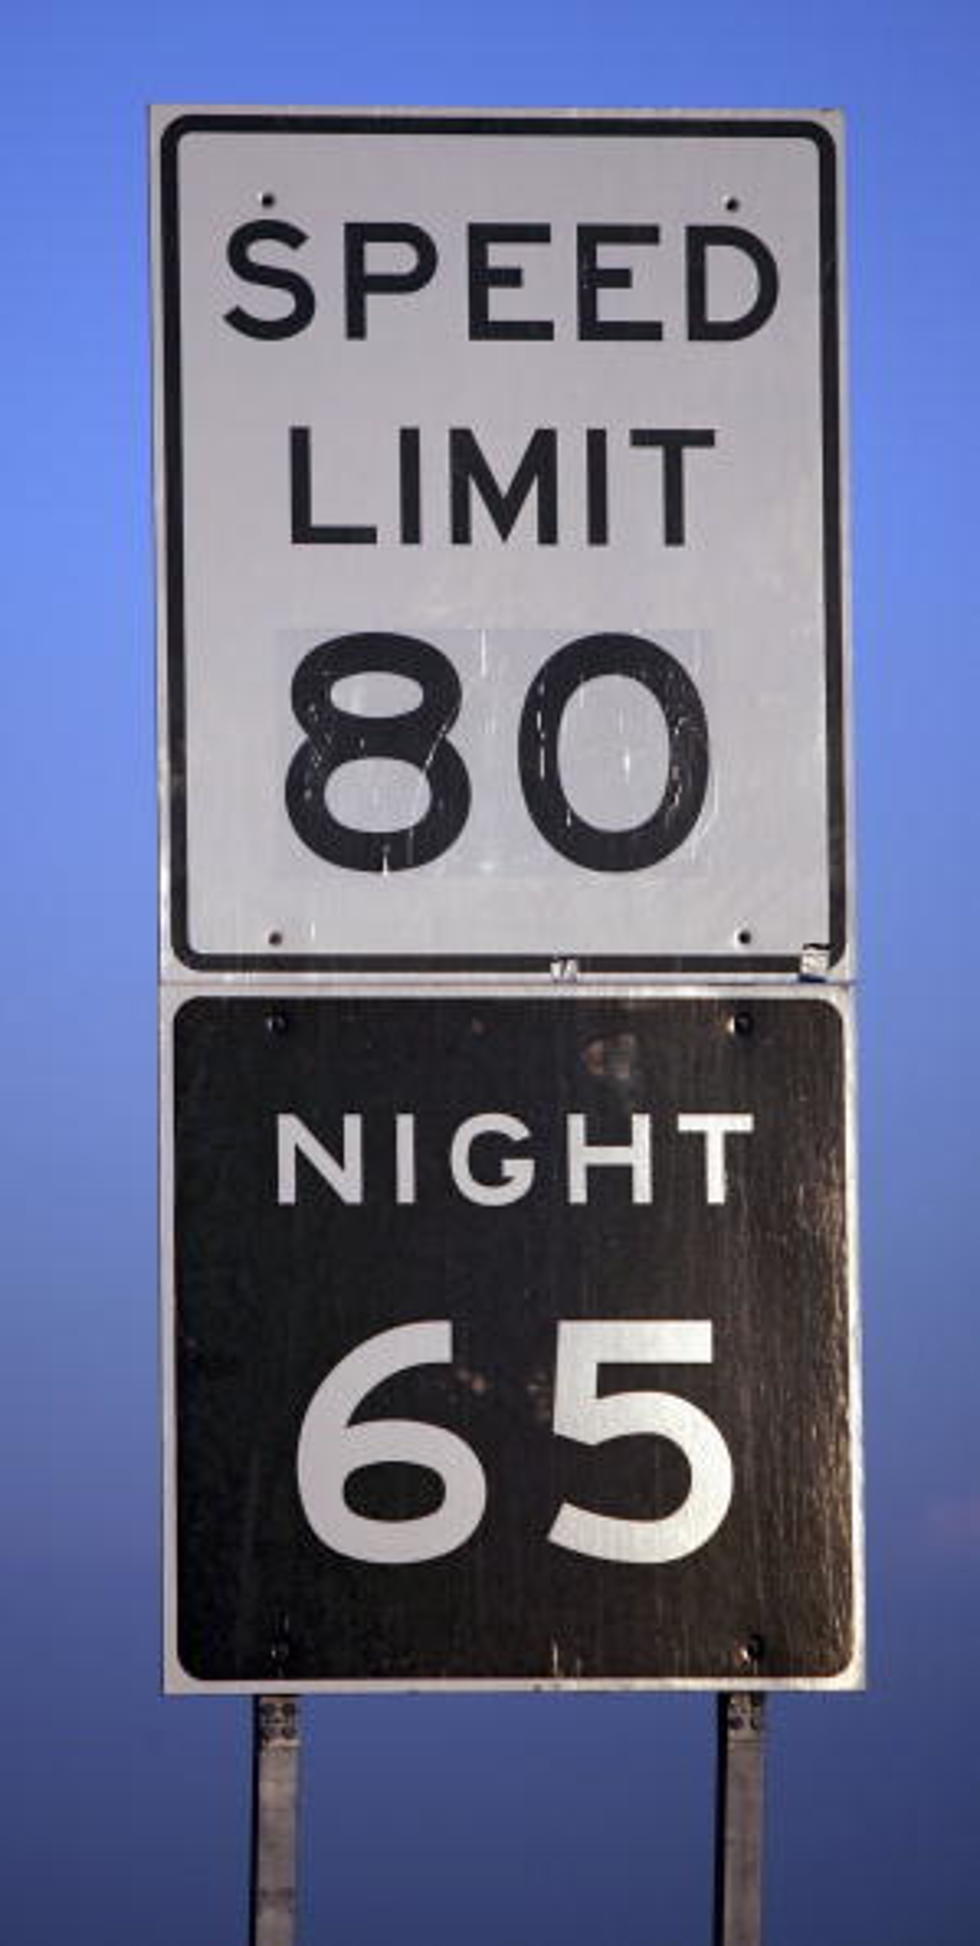 I Can’t Drive 80: Wyoming Transportation Considers Speed Limit Change